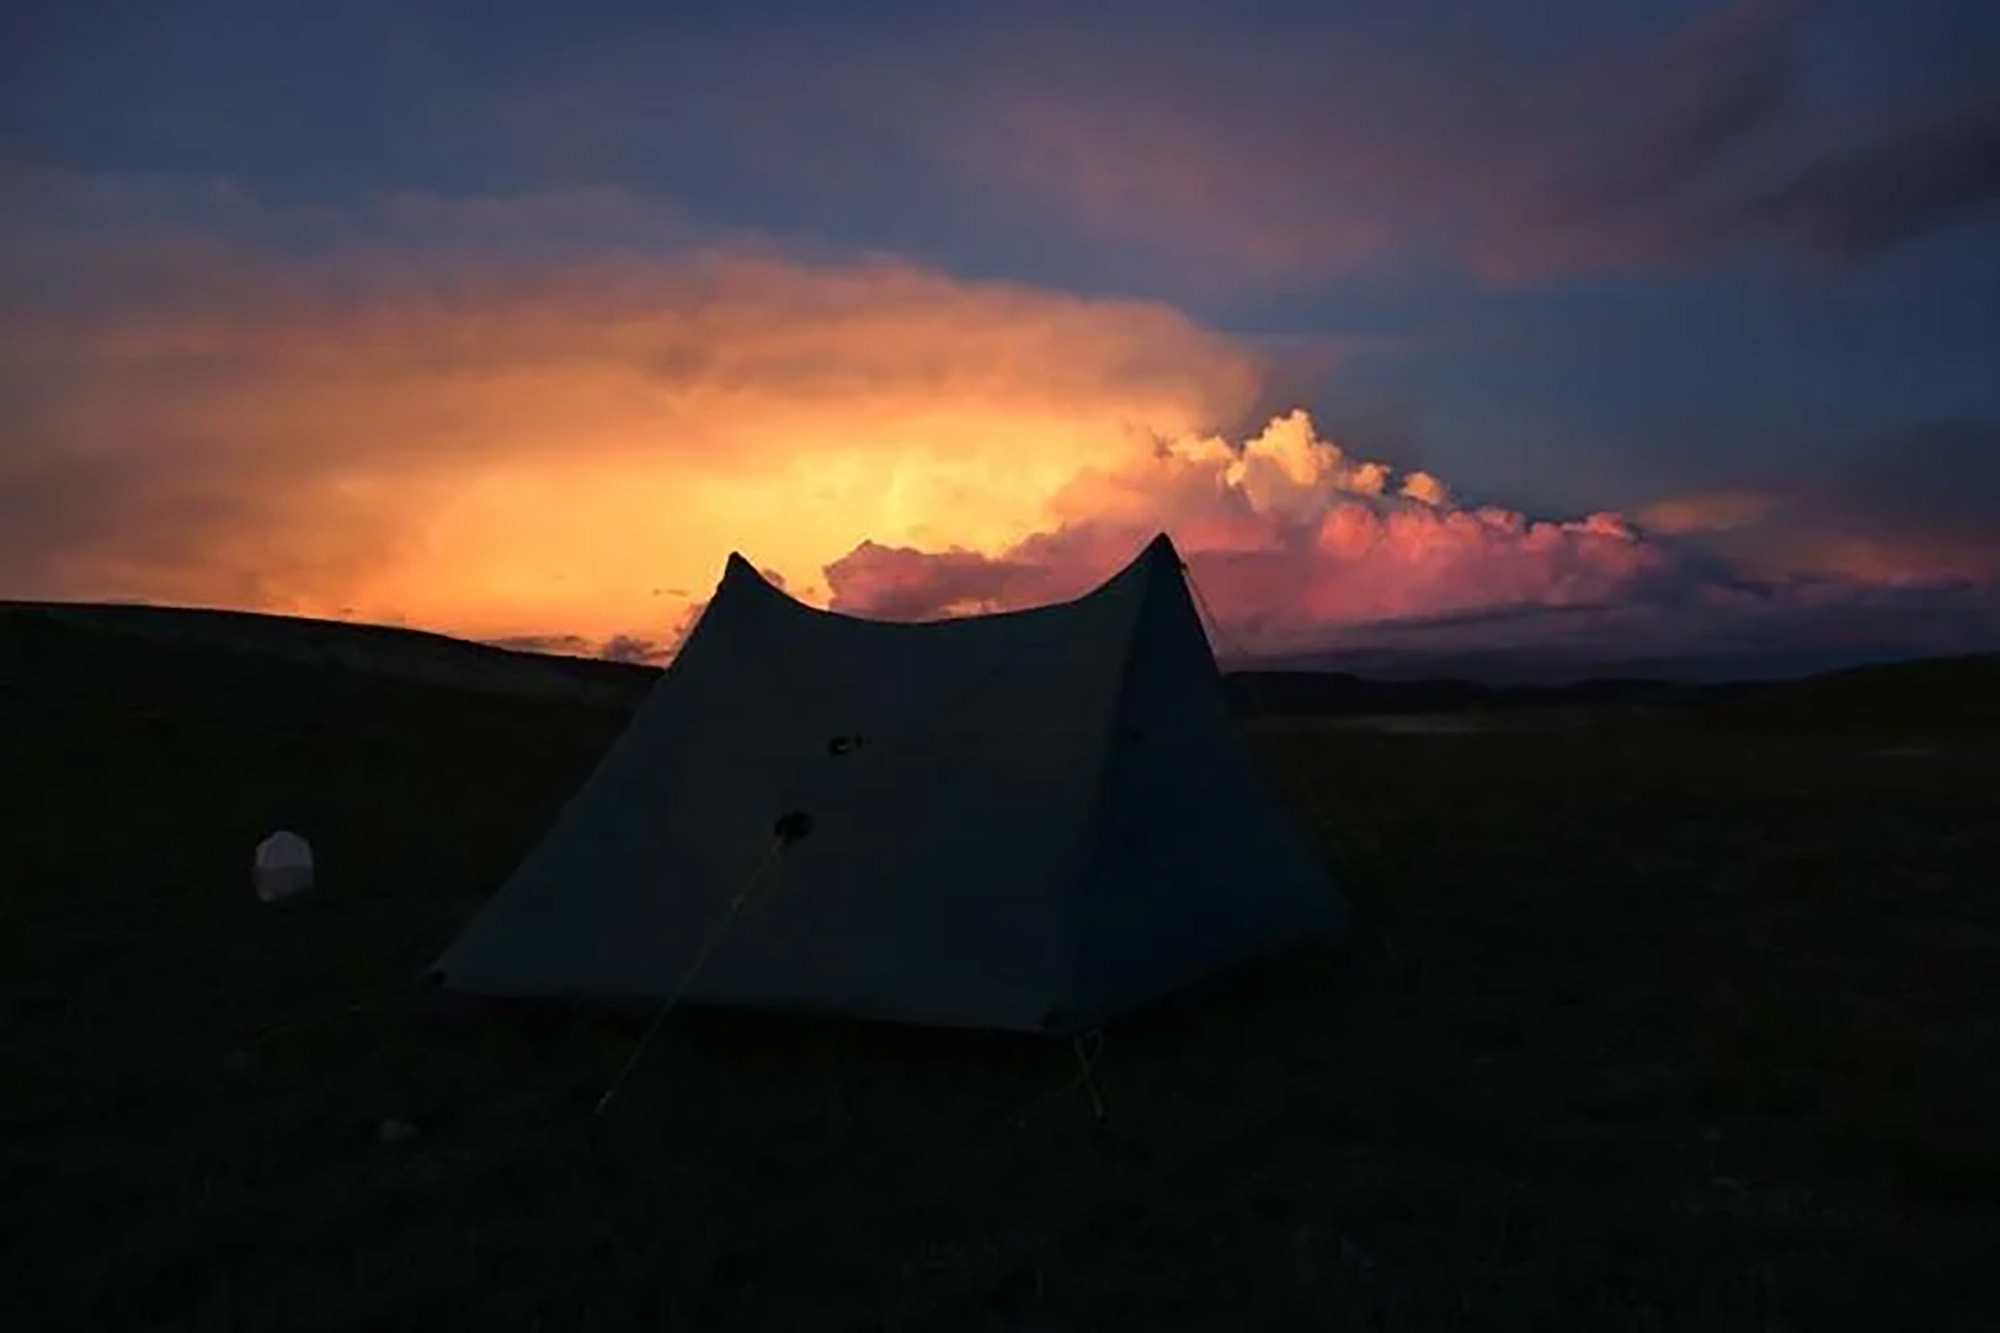 Clouds build as the sun sets over India Wood's tent during her walk across Colorado.